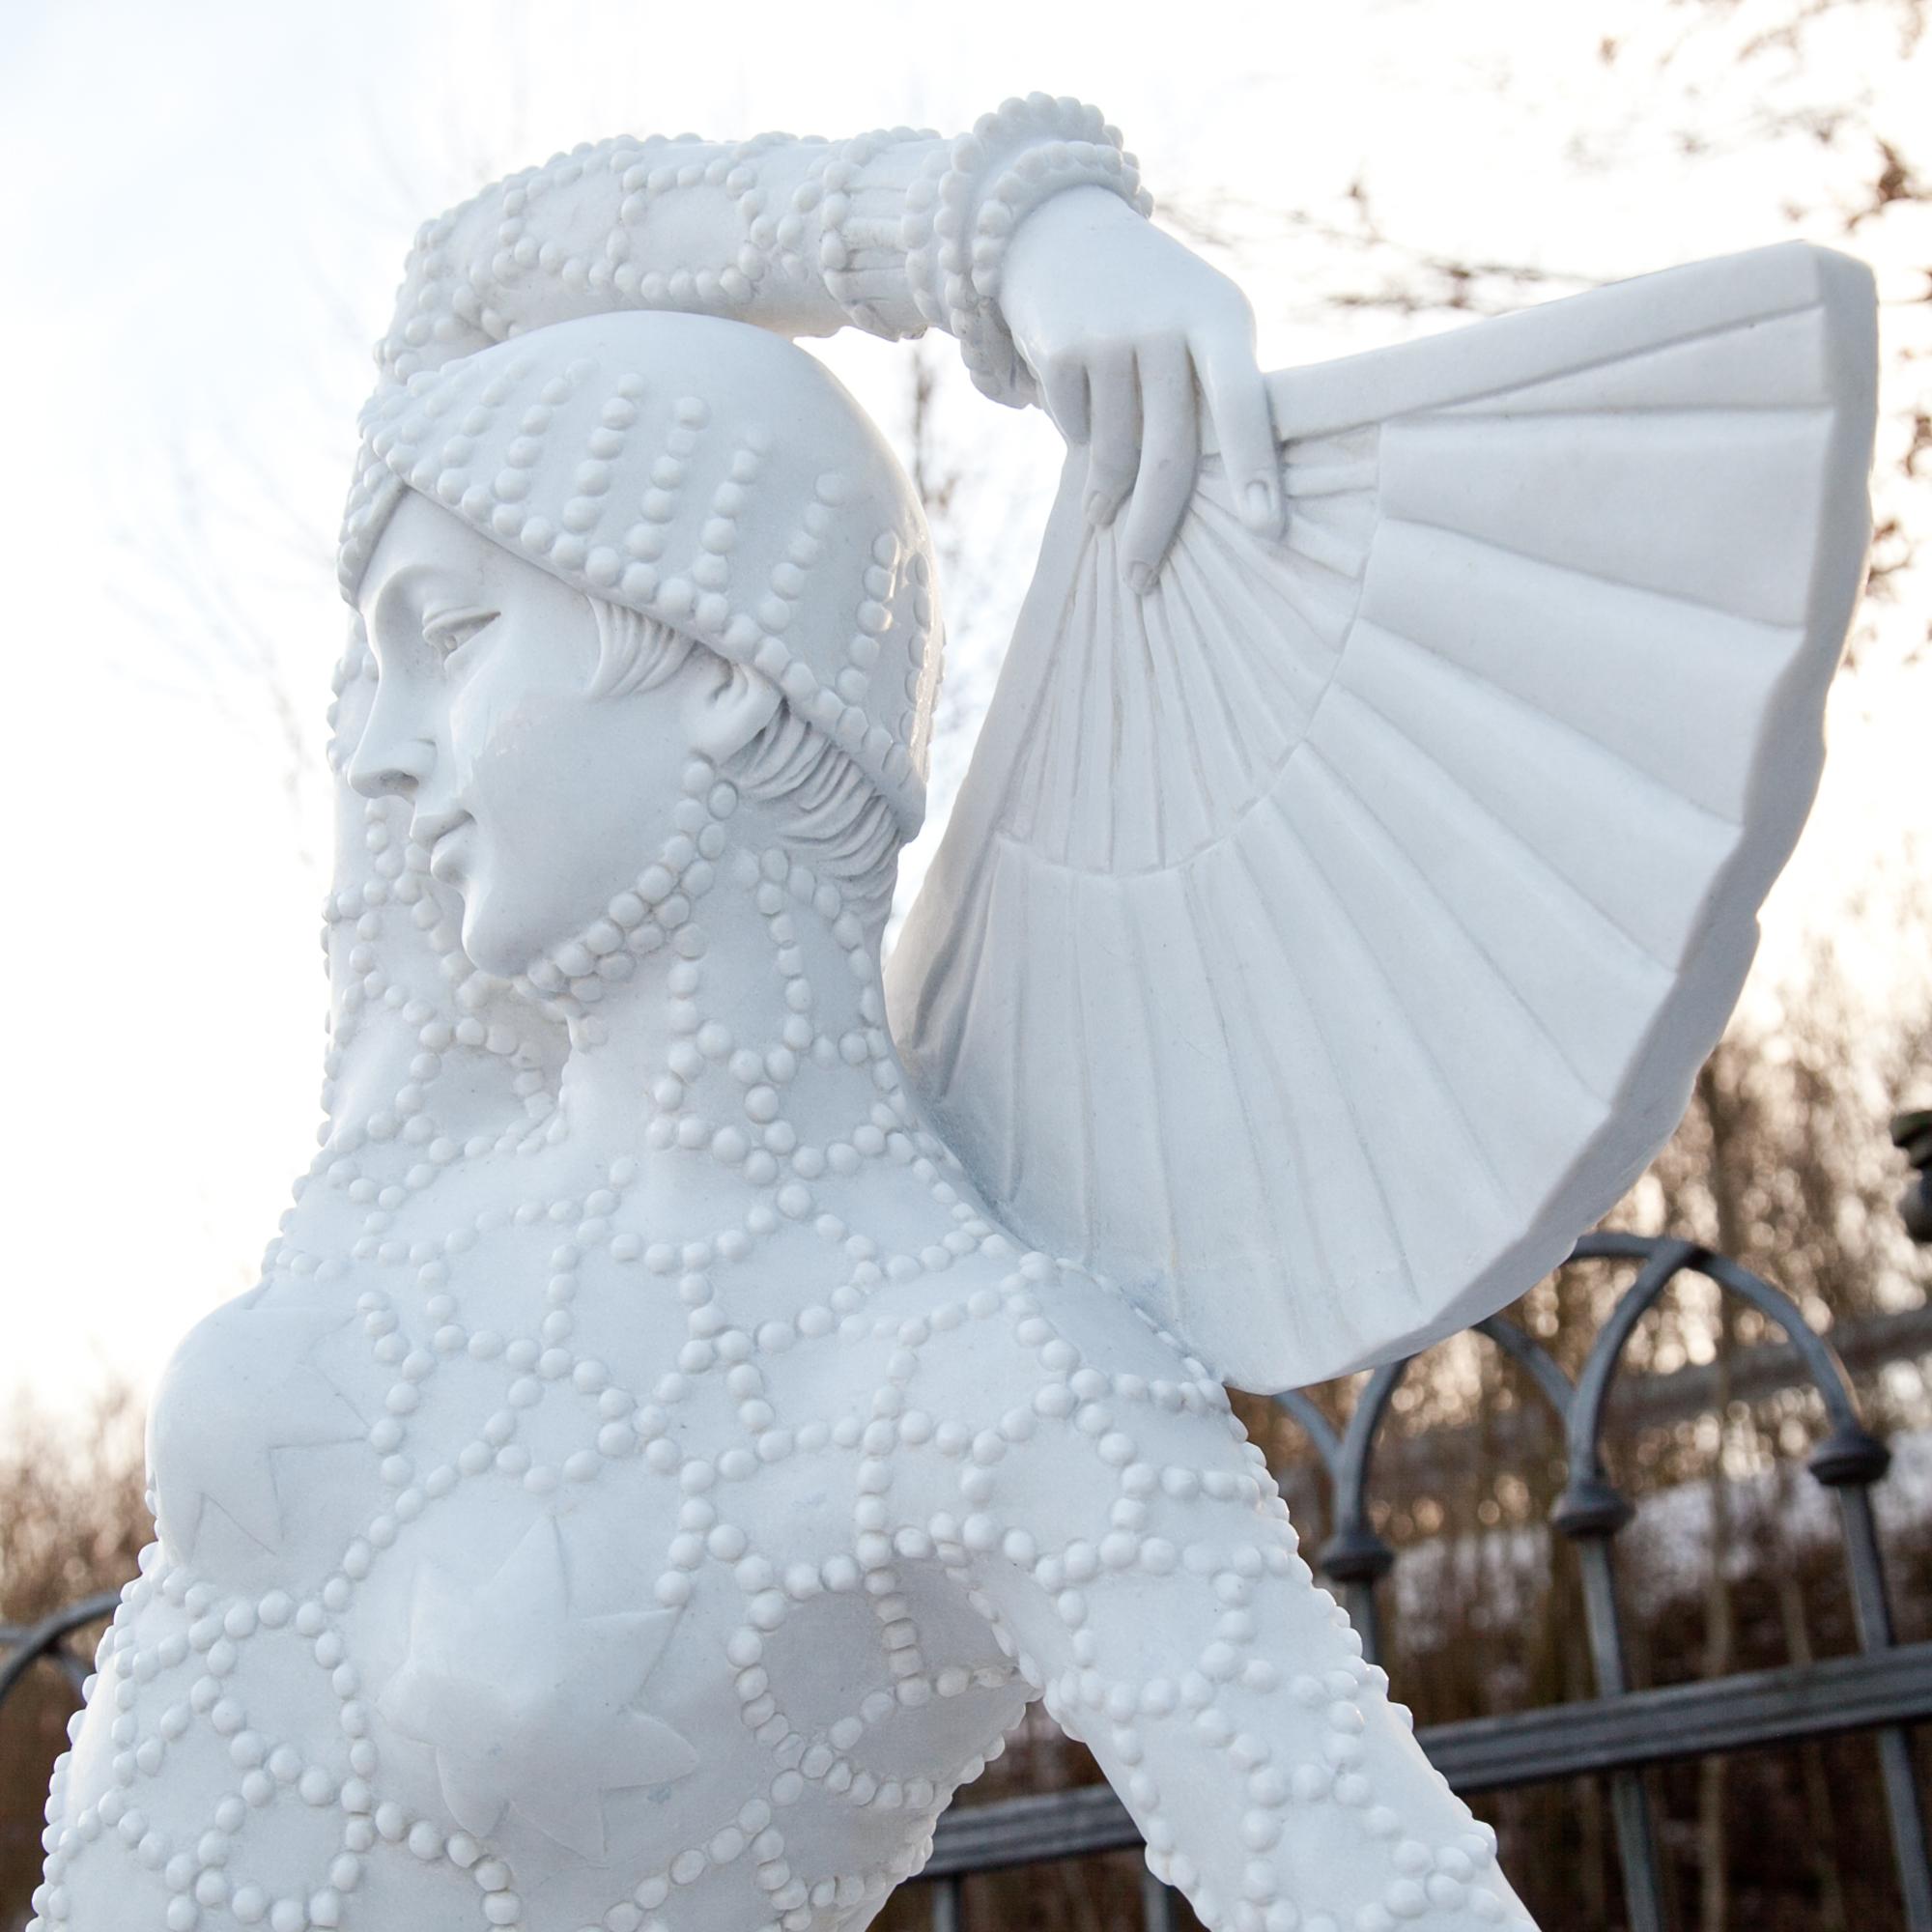 Marble sculpture of a fan dancer in a costume with beaded pearls. The sculpture was hand-carved out of white marble and has a very fine surface.